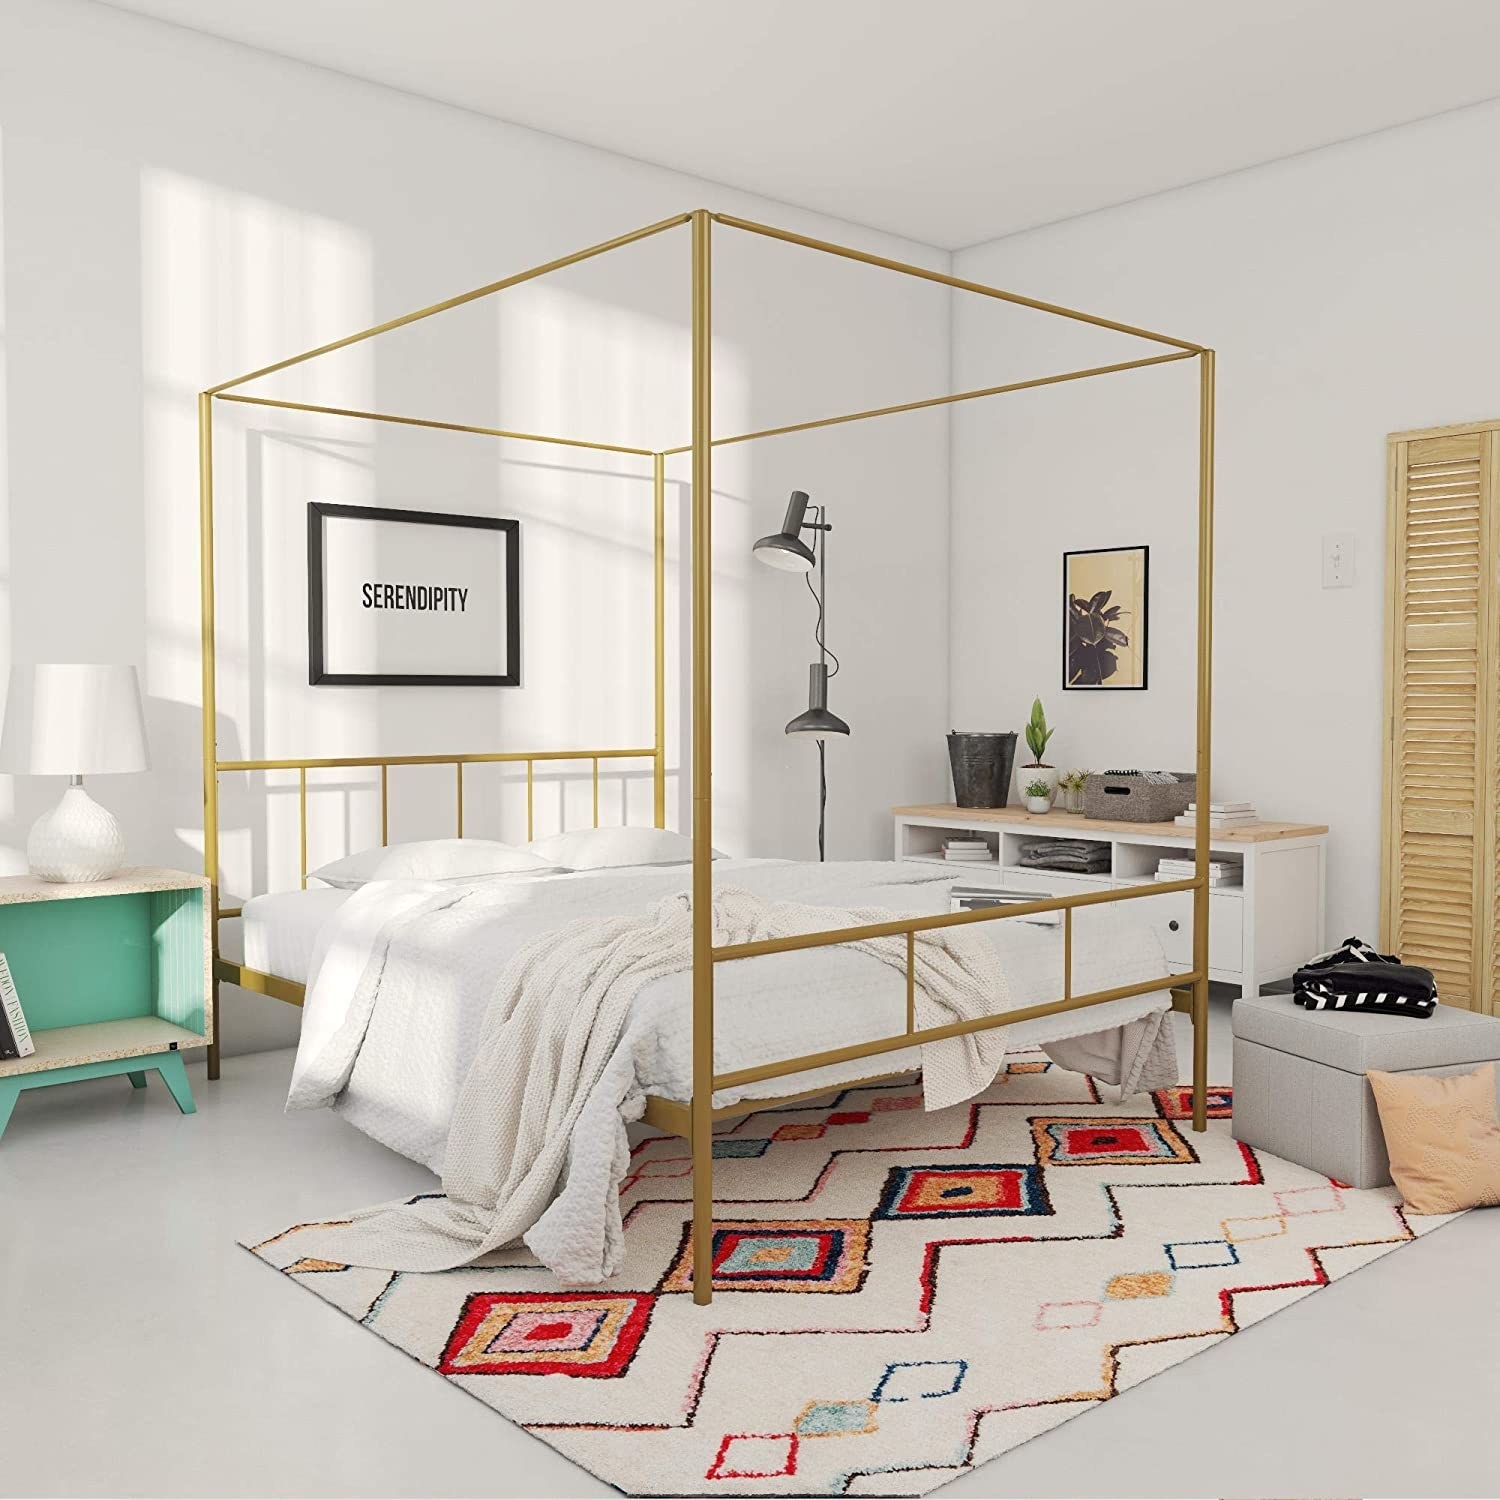 The canopy bed frame in gold